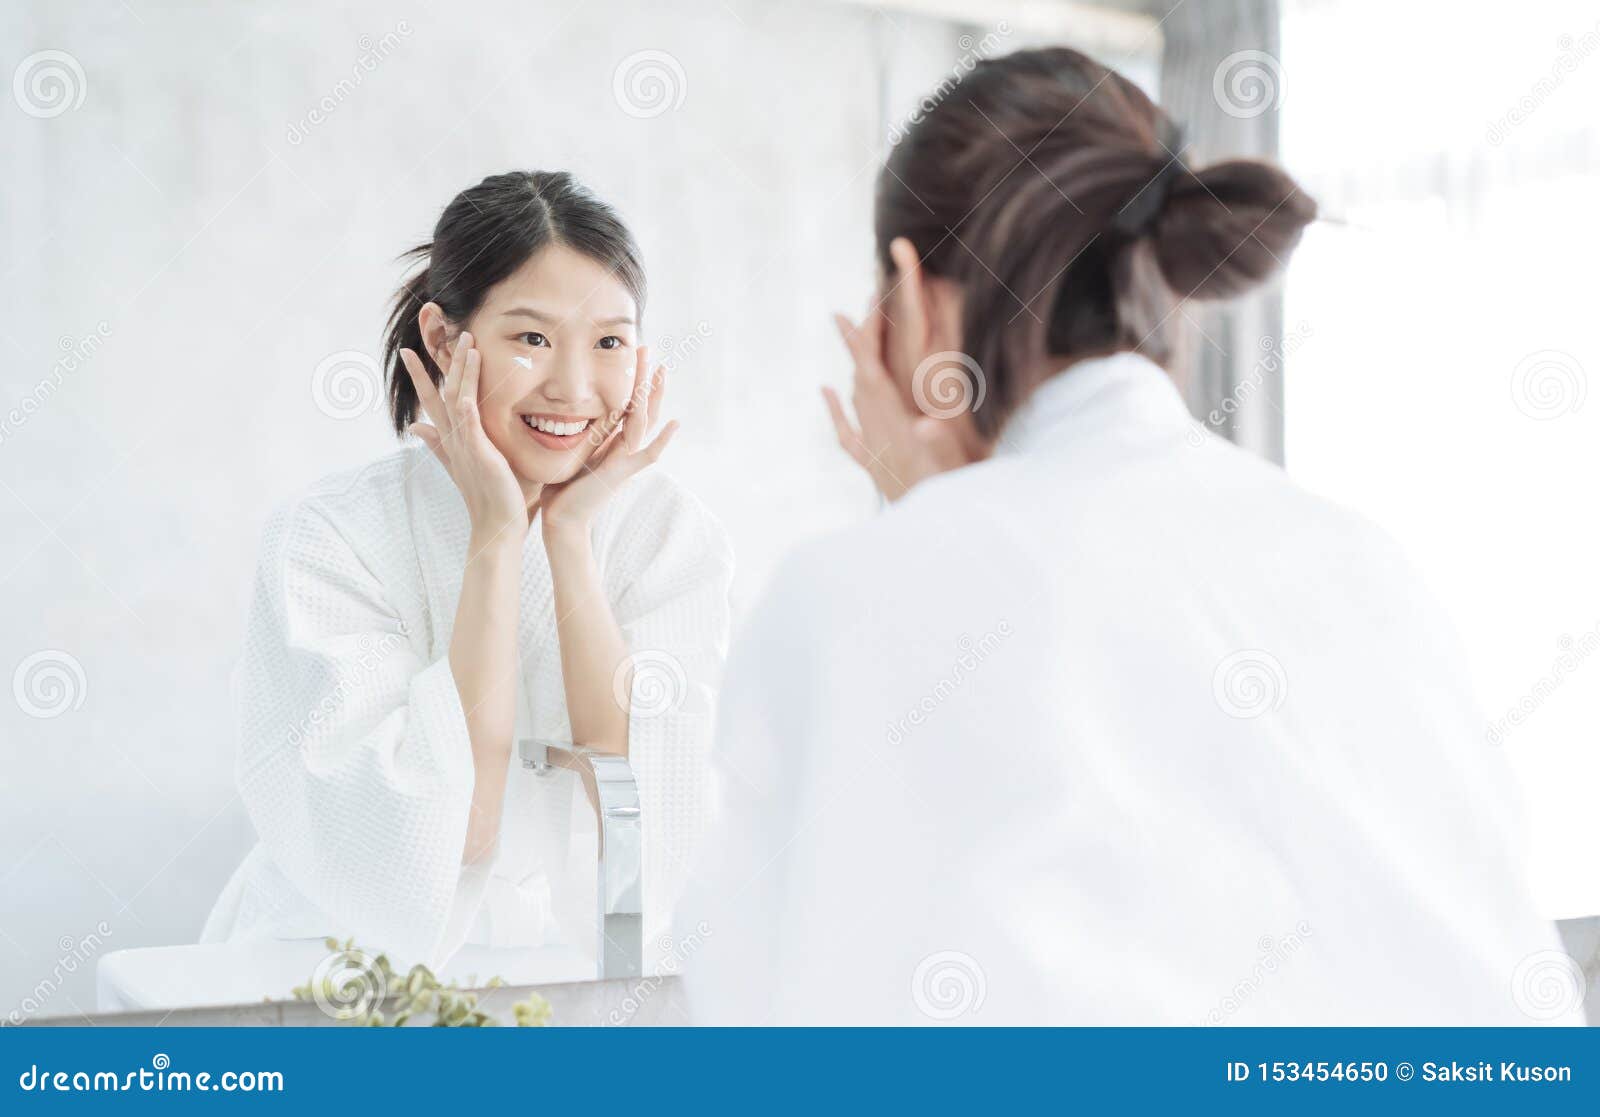 female skin care. young asian woman touching her face and looking to mirror in bathroom.